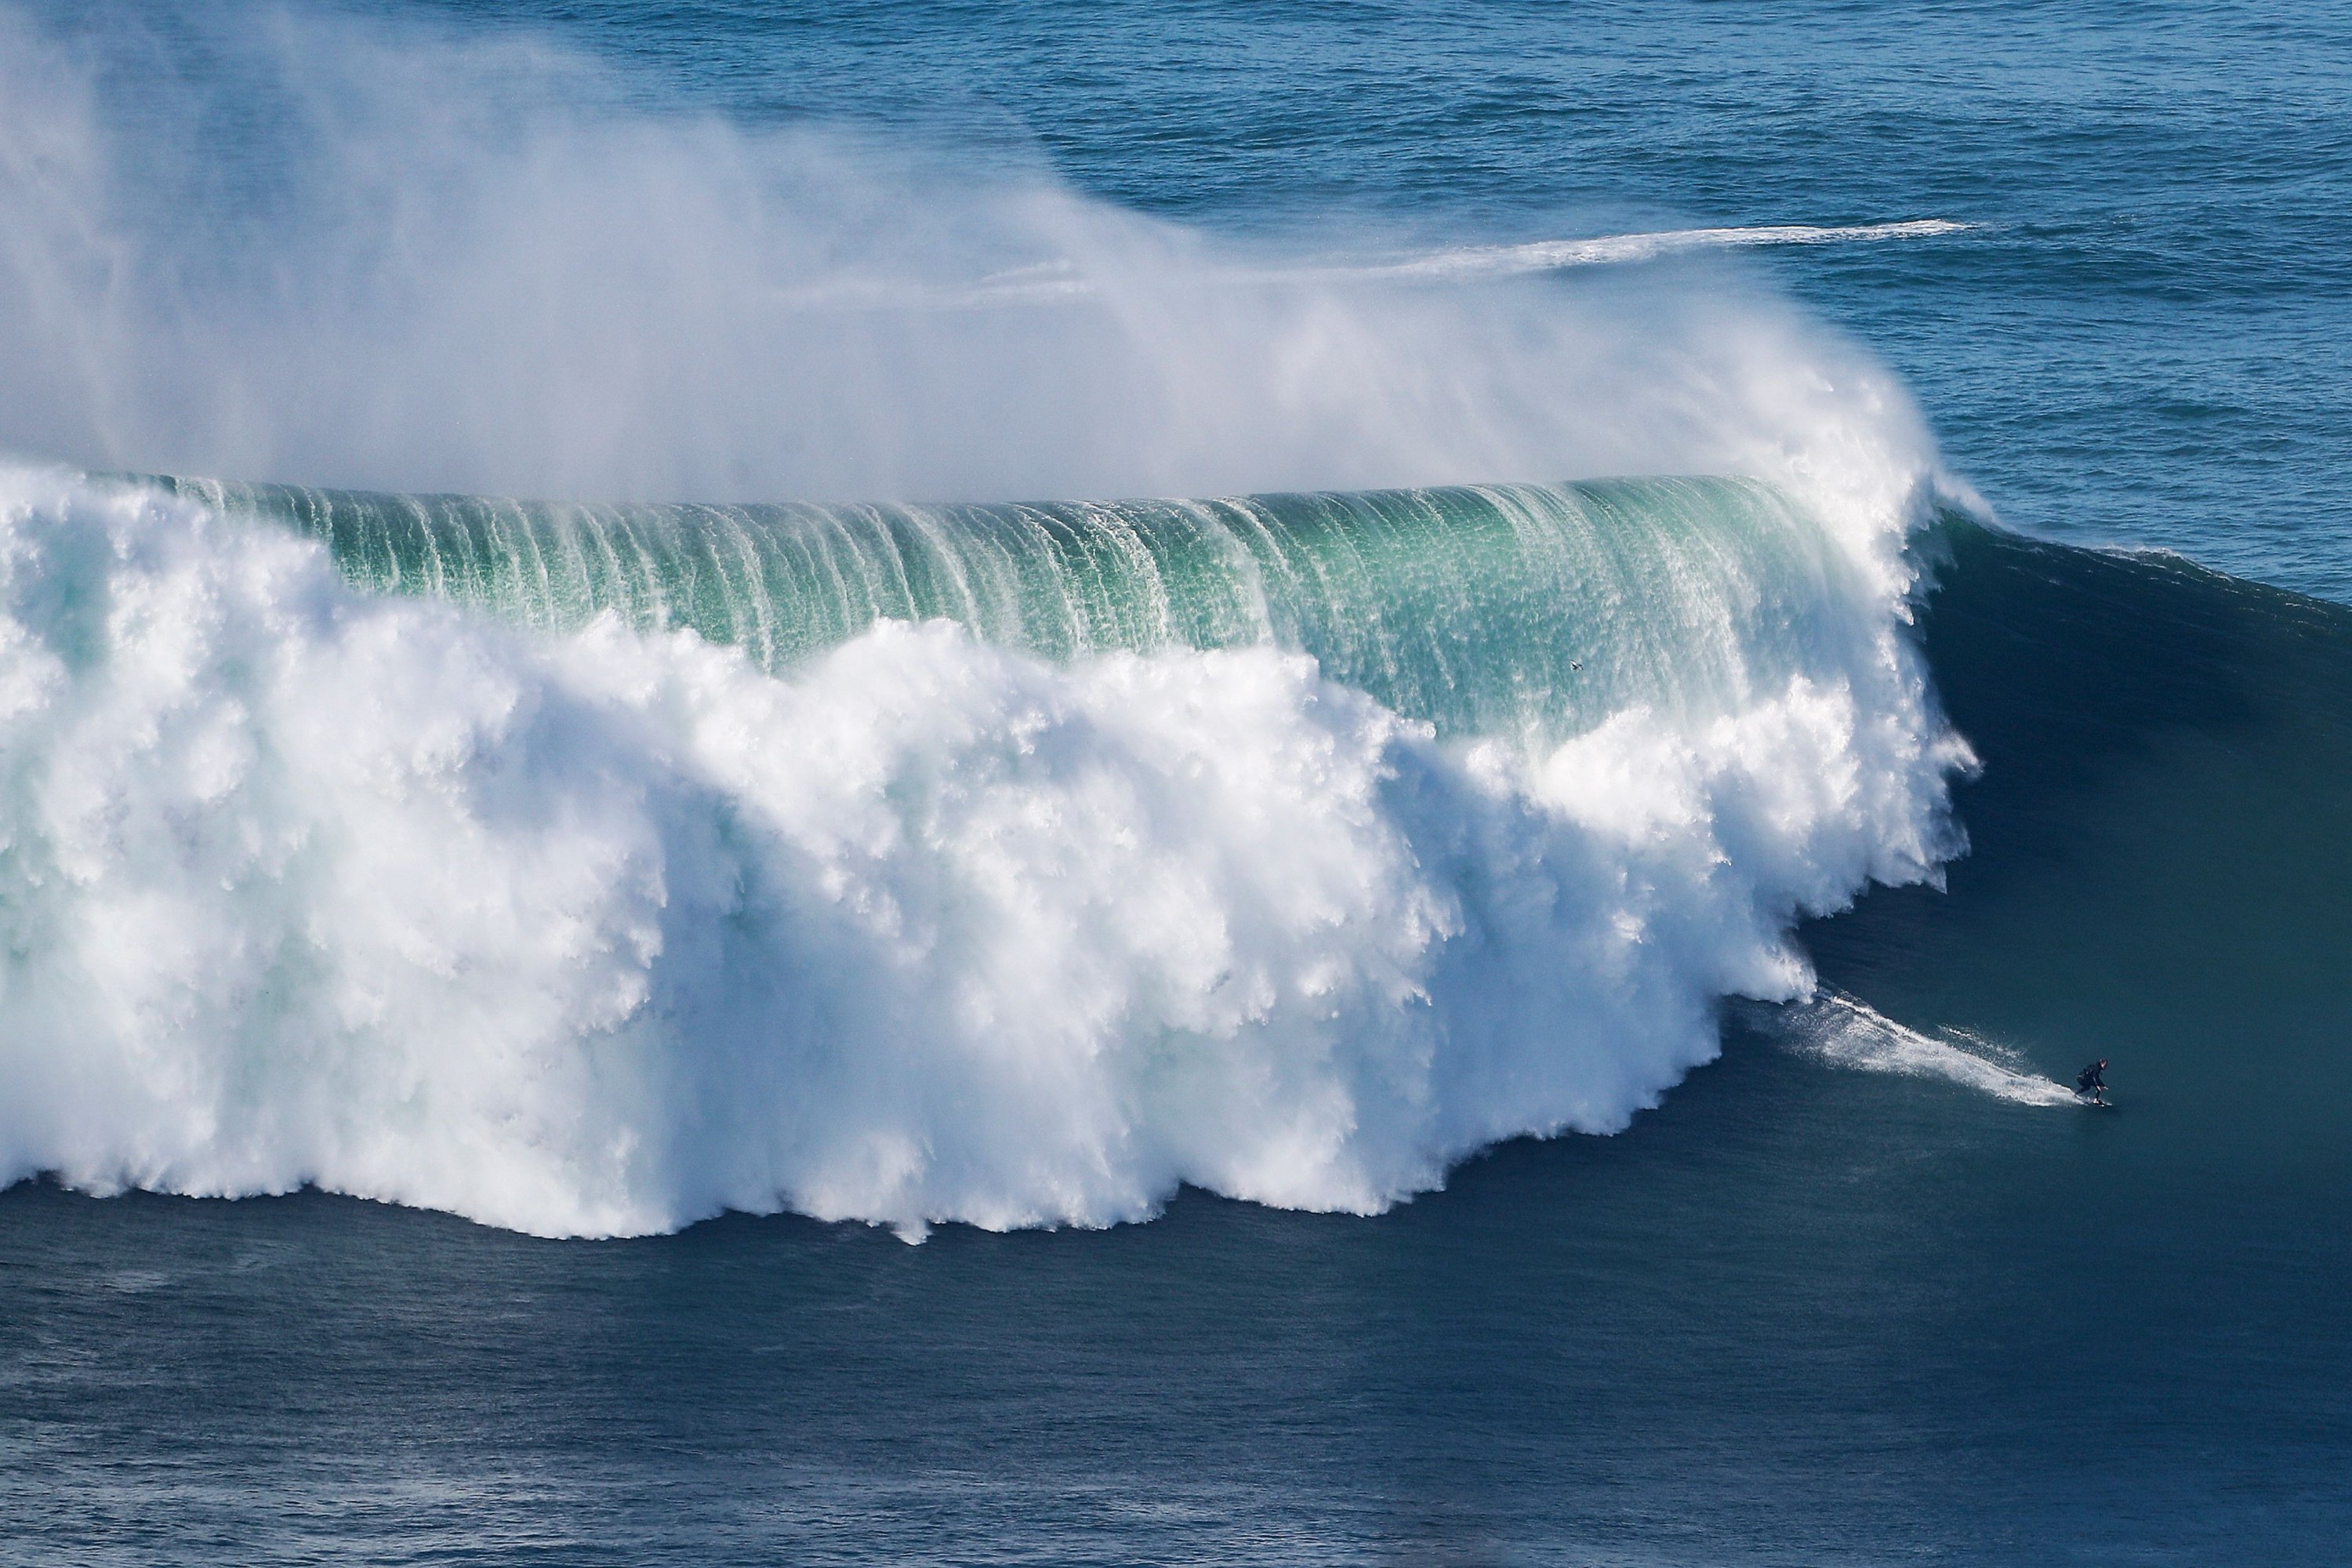 Hurricane-generated swell draws big wave surfers to Portugal's